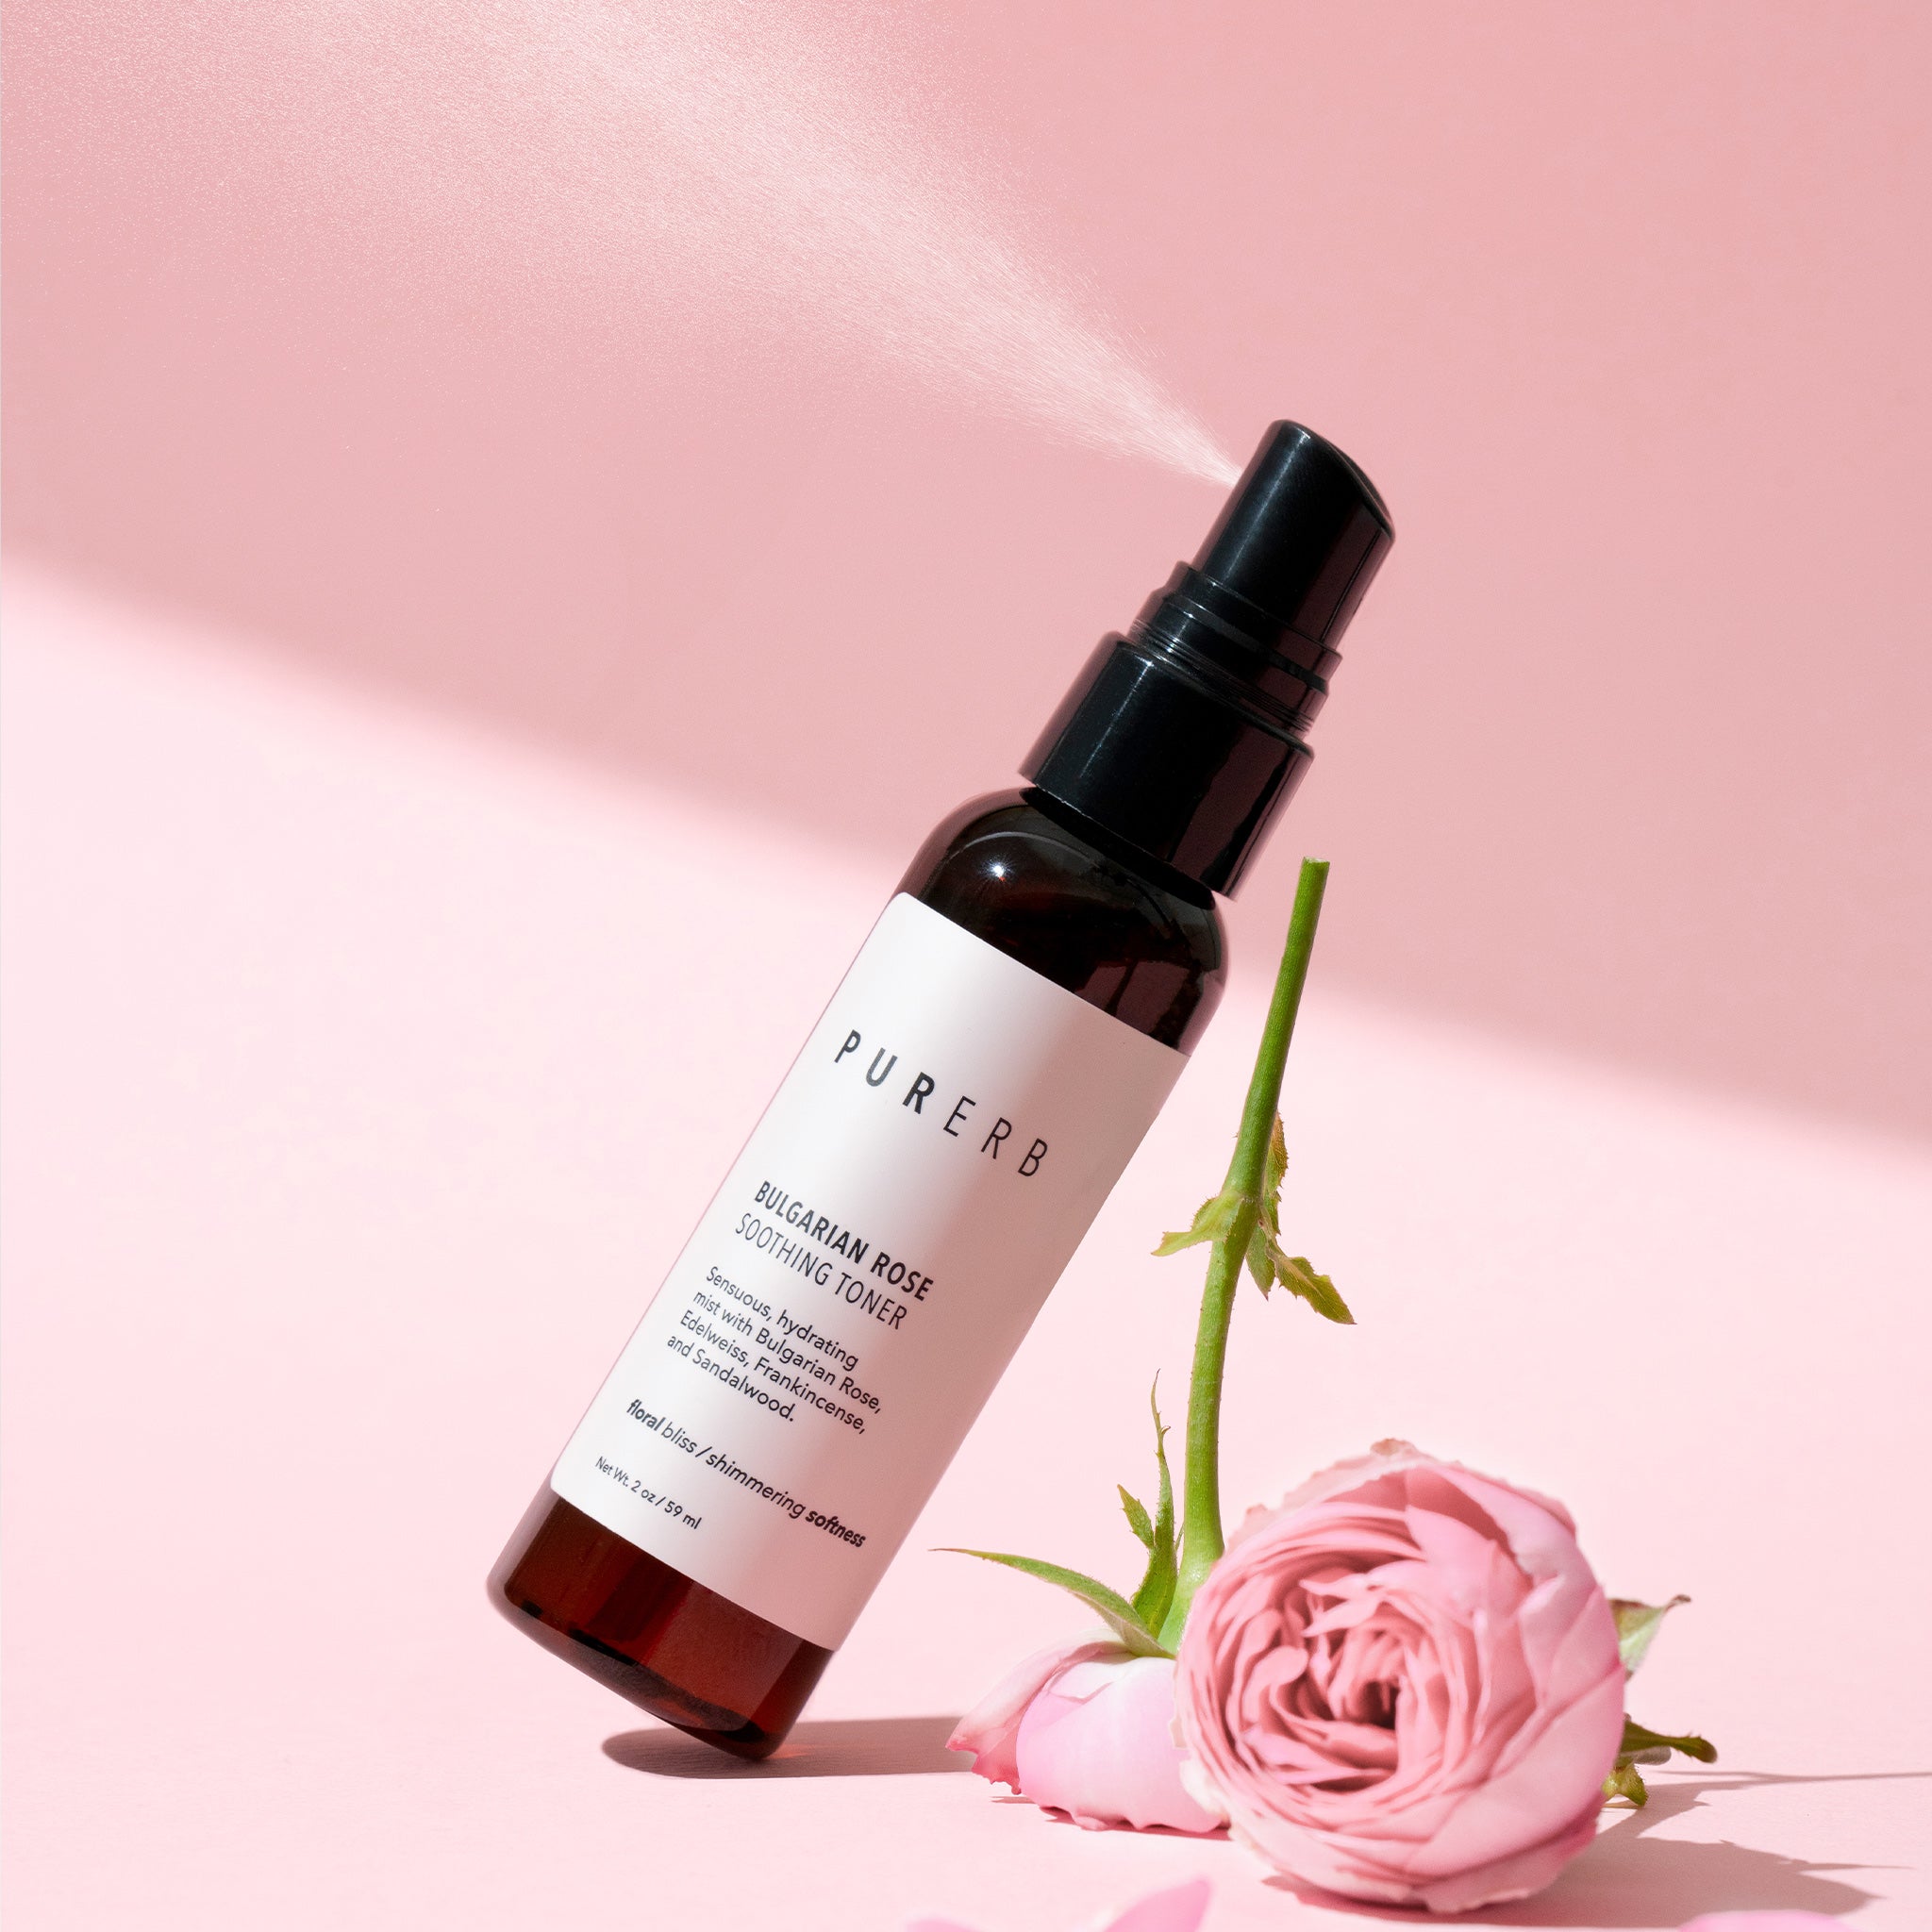 Bulgarian Rose Soothing Toner - Instant hydration boost with Bulgarian Rose Water and Edelweiss Stem Cells. Nourishes and protects the skin's moisture barrier. Ideal for all skin types, including dryness, irritation, lines, and wrinkles